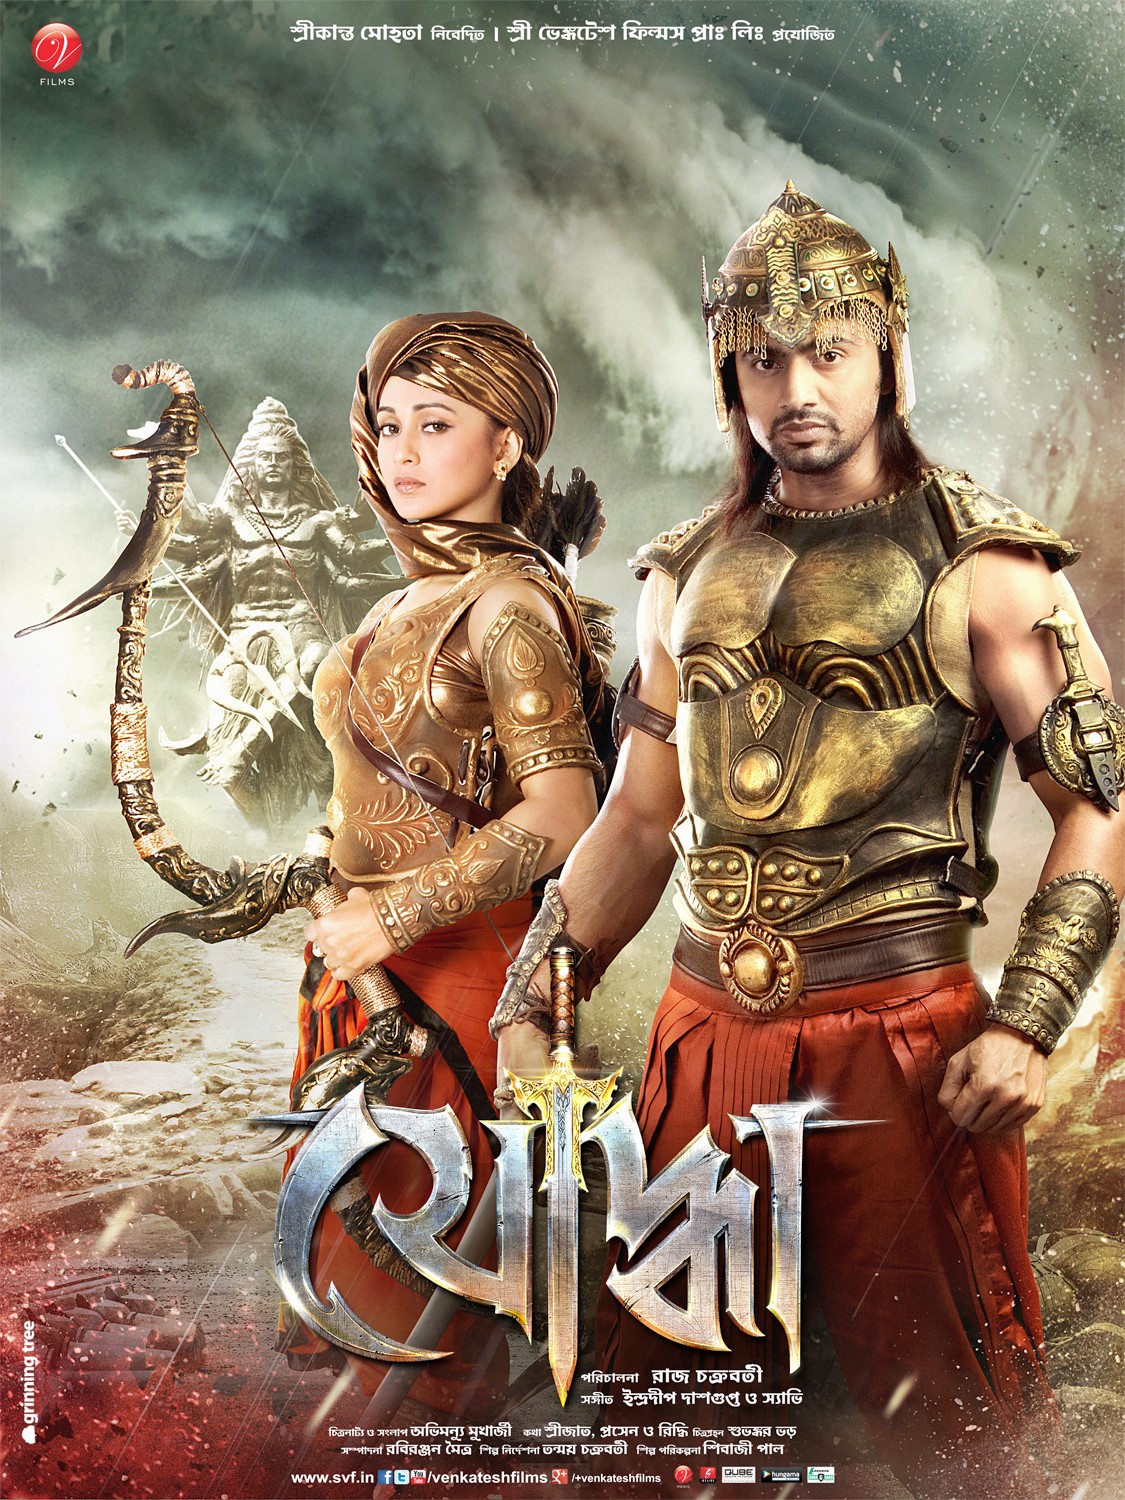 Extra Large Movie Poster Image for Yoddha The Warrior (#5 of 7)